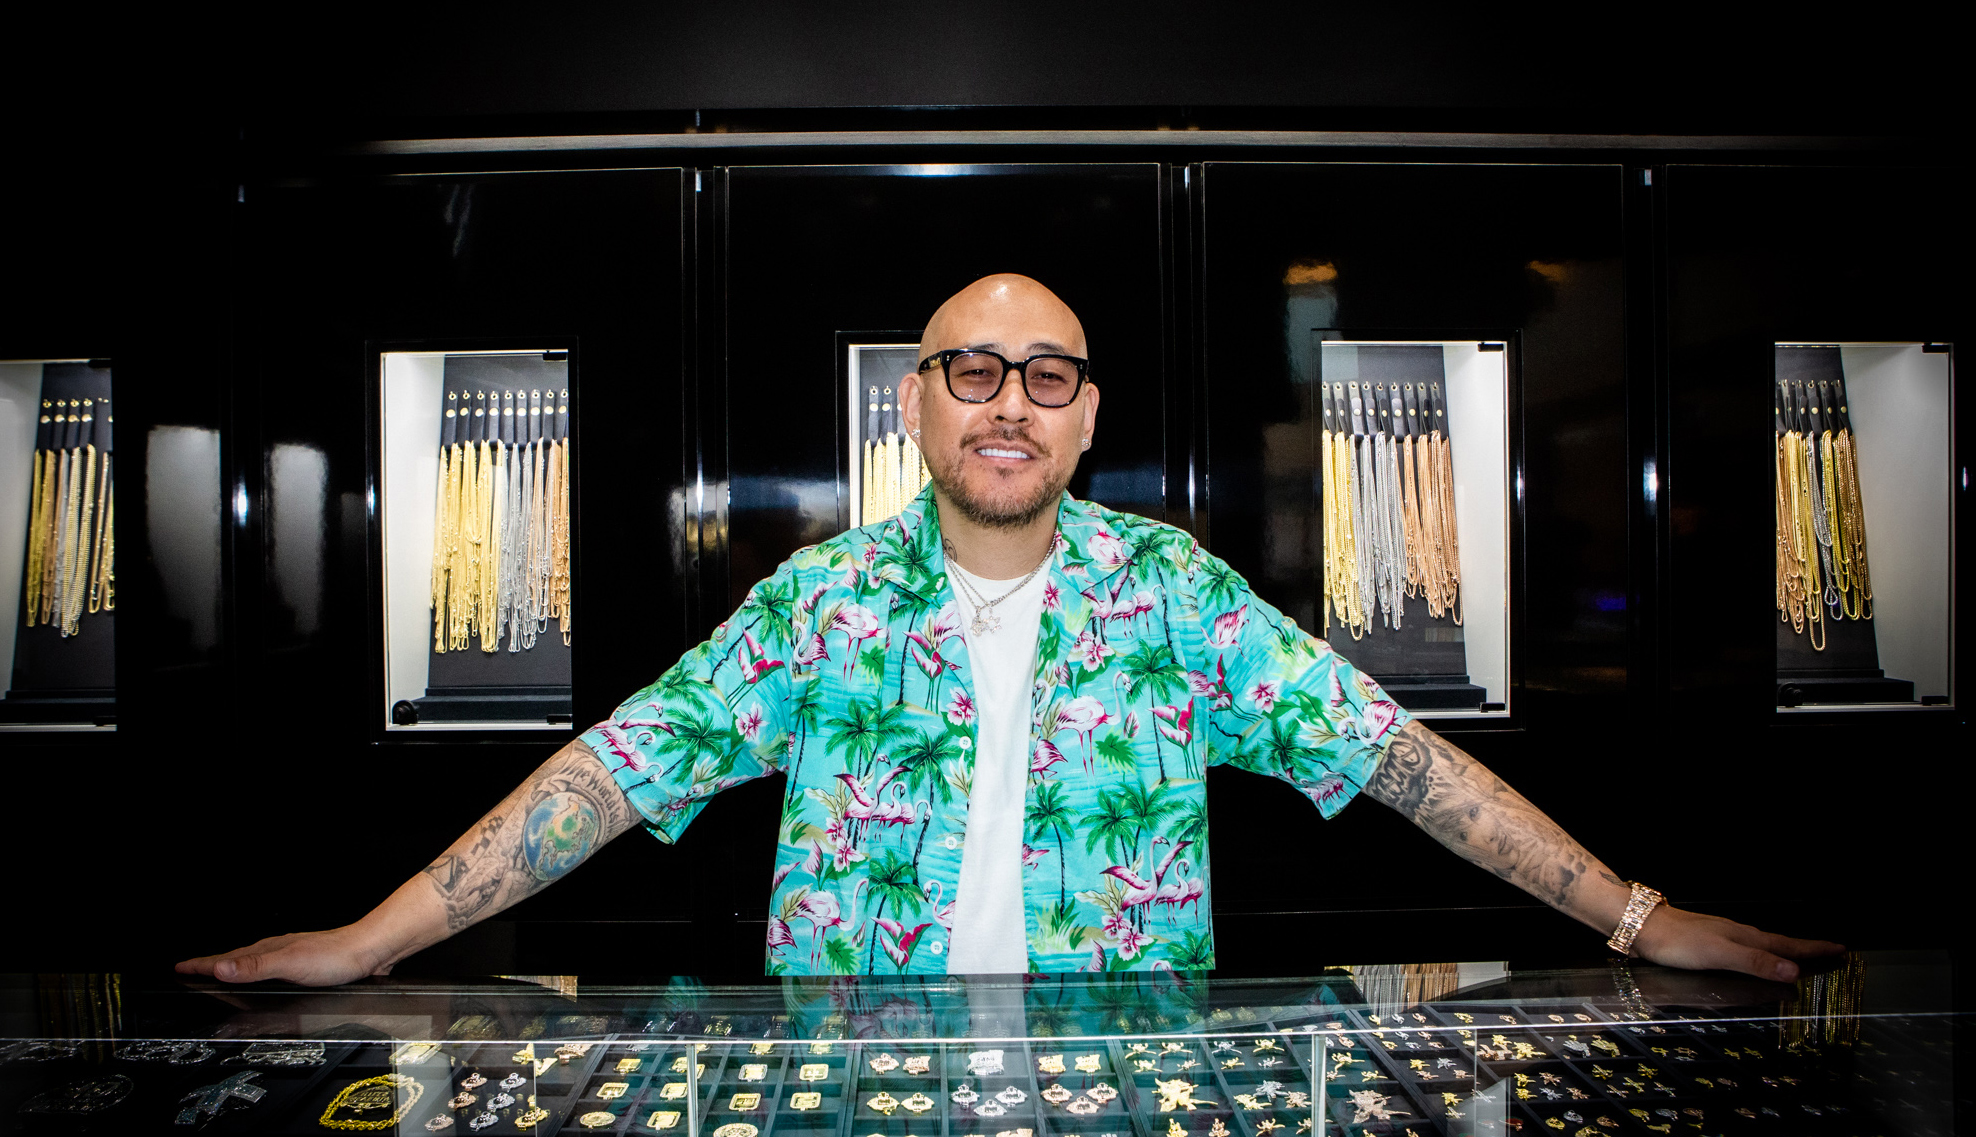 Diamond Jeweler Ben Baller at his Los Angeles Custom Jewelry Business IF and Co.